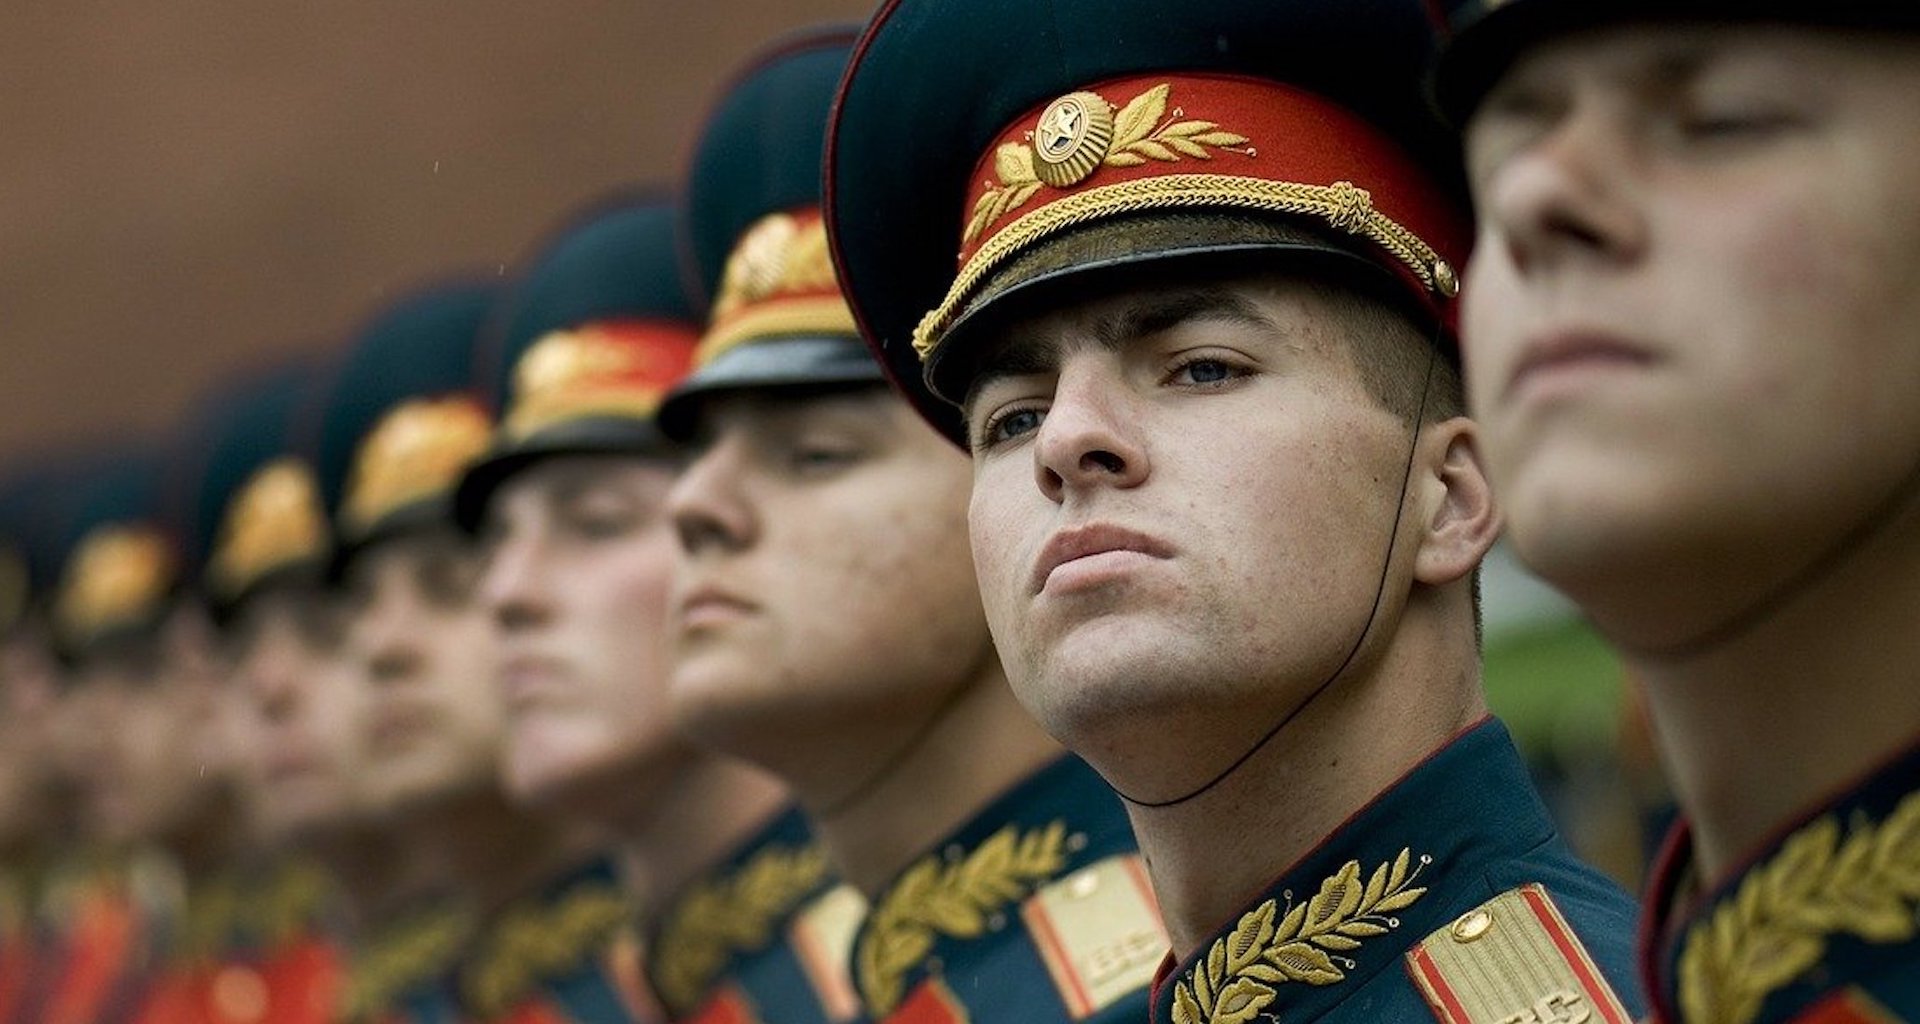 Russia’s youth is tired of lavish military parades. Could digital culture change the country’s wartime pageantry for good? 